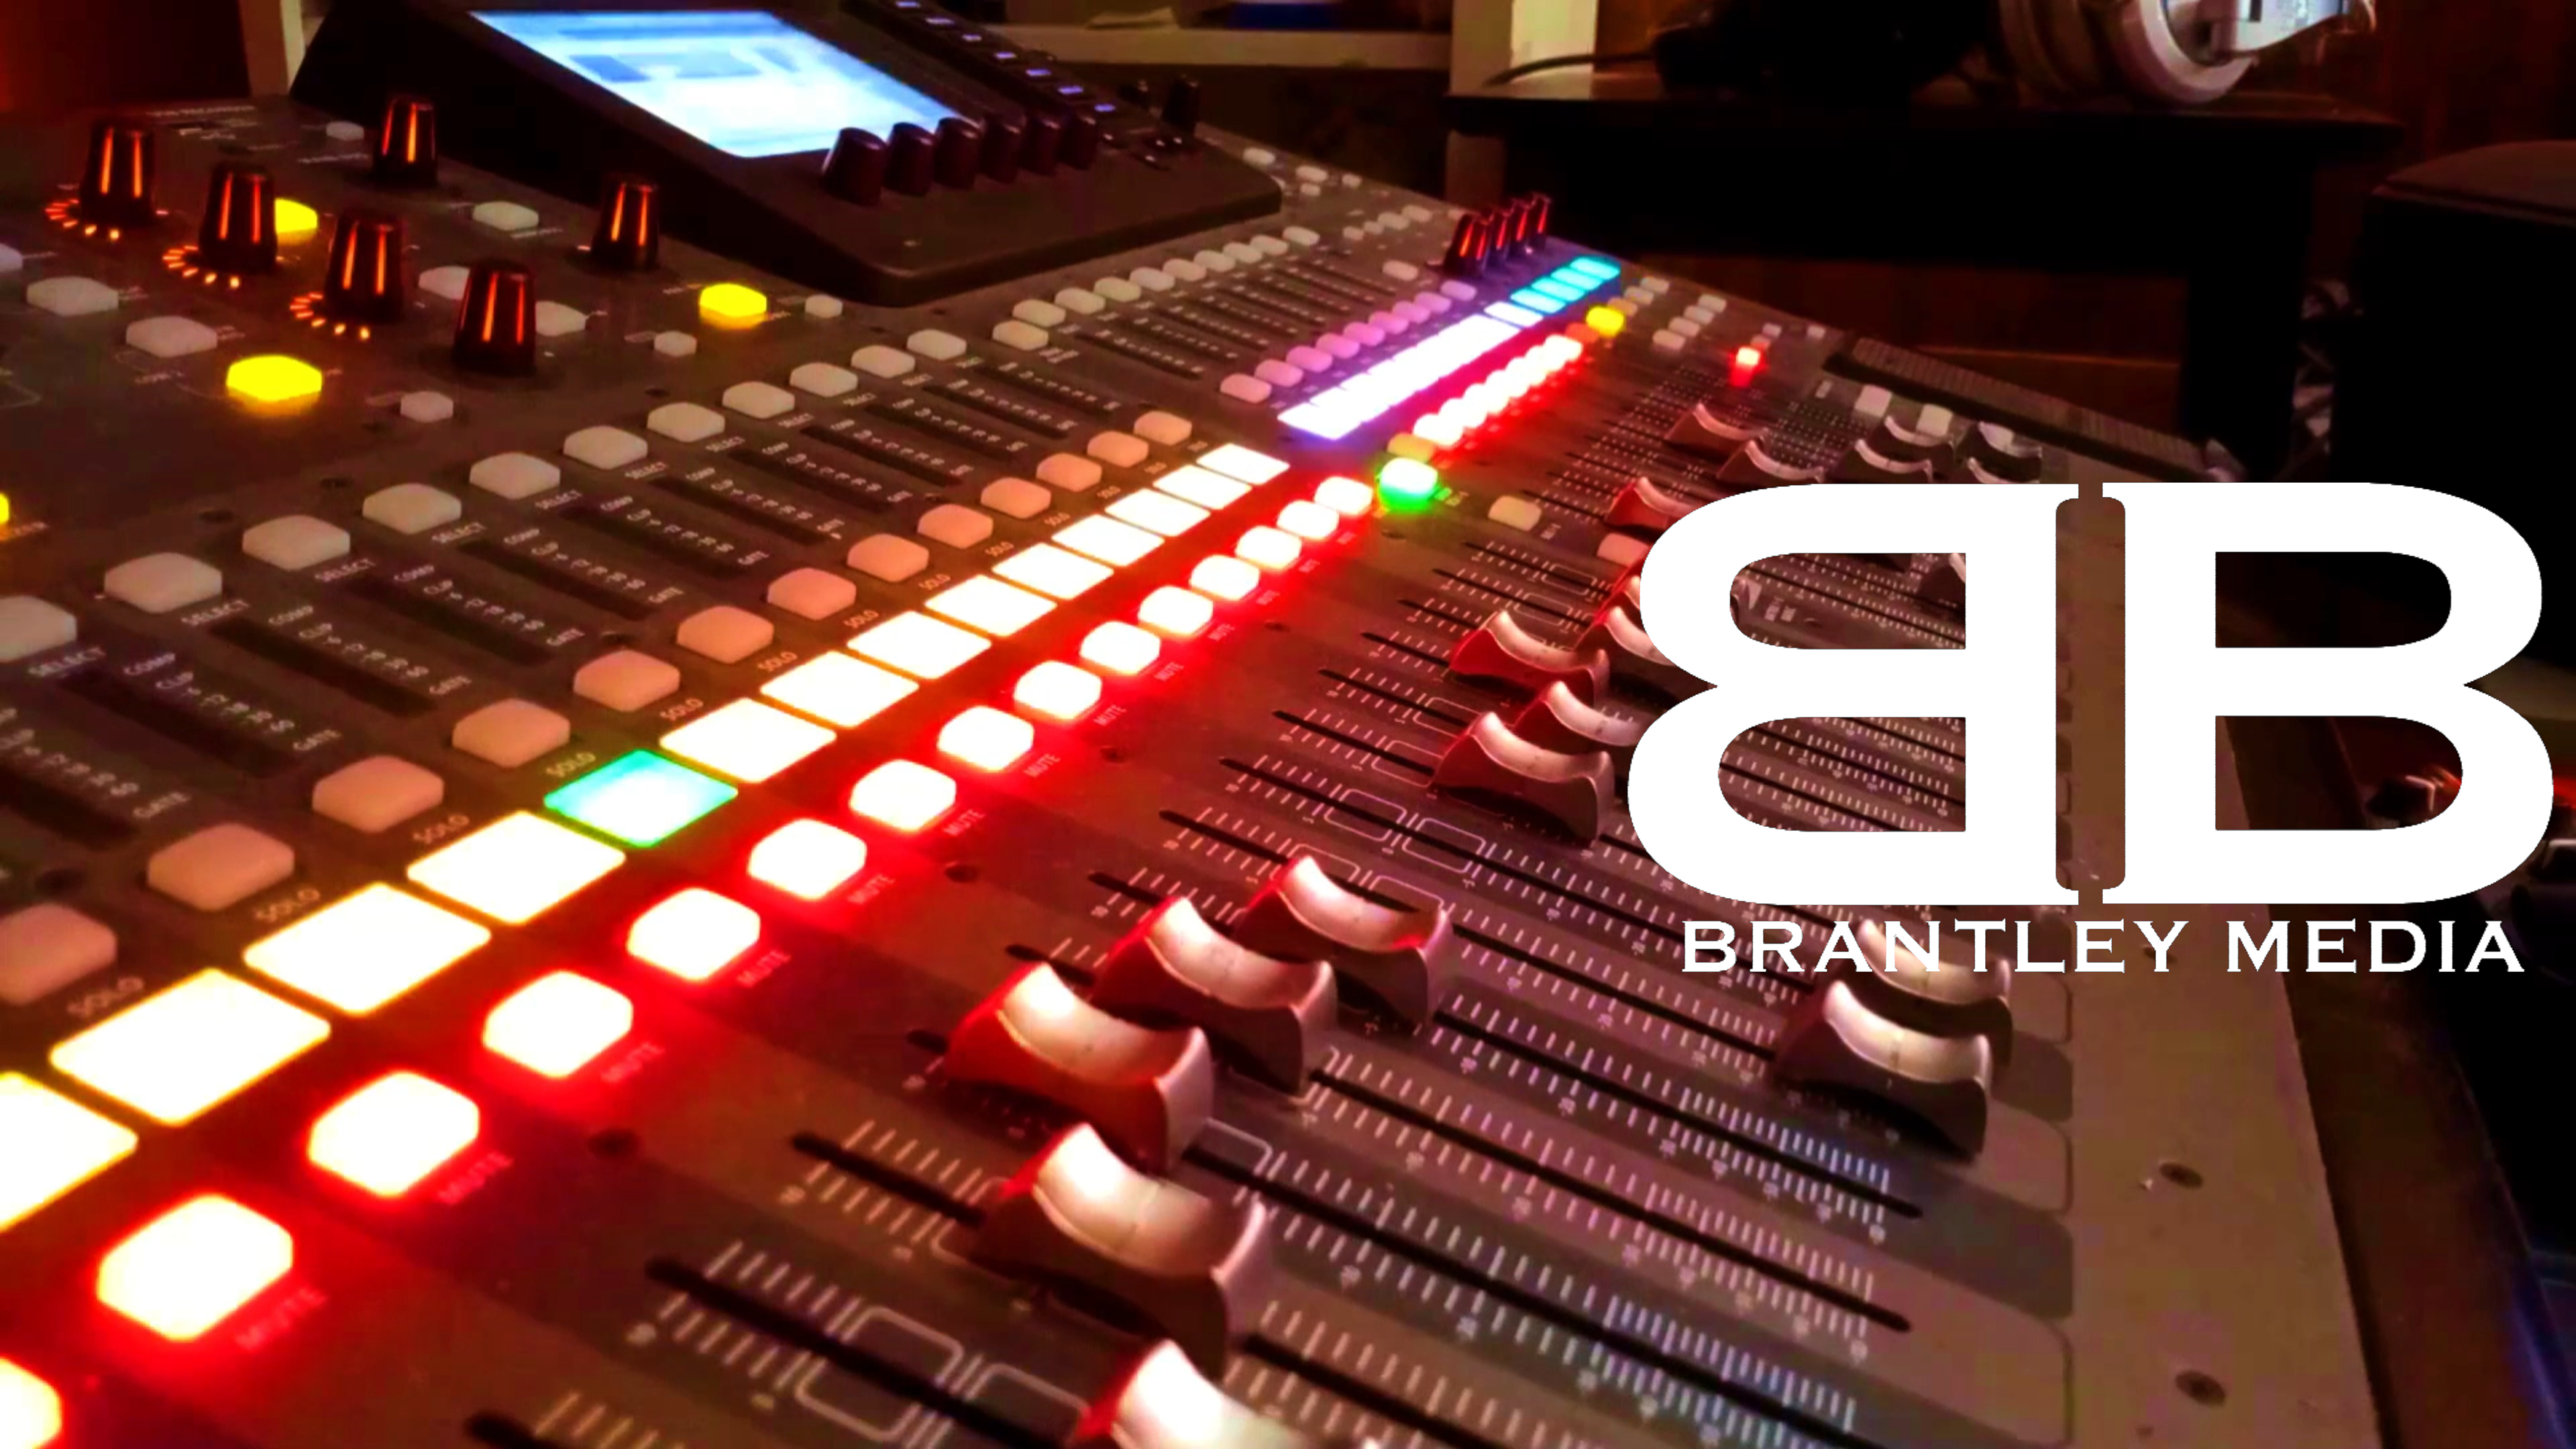 X32 mixing board with Brantley Media Logo